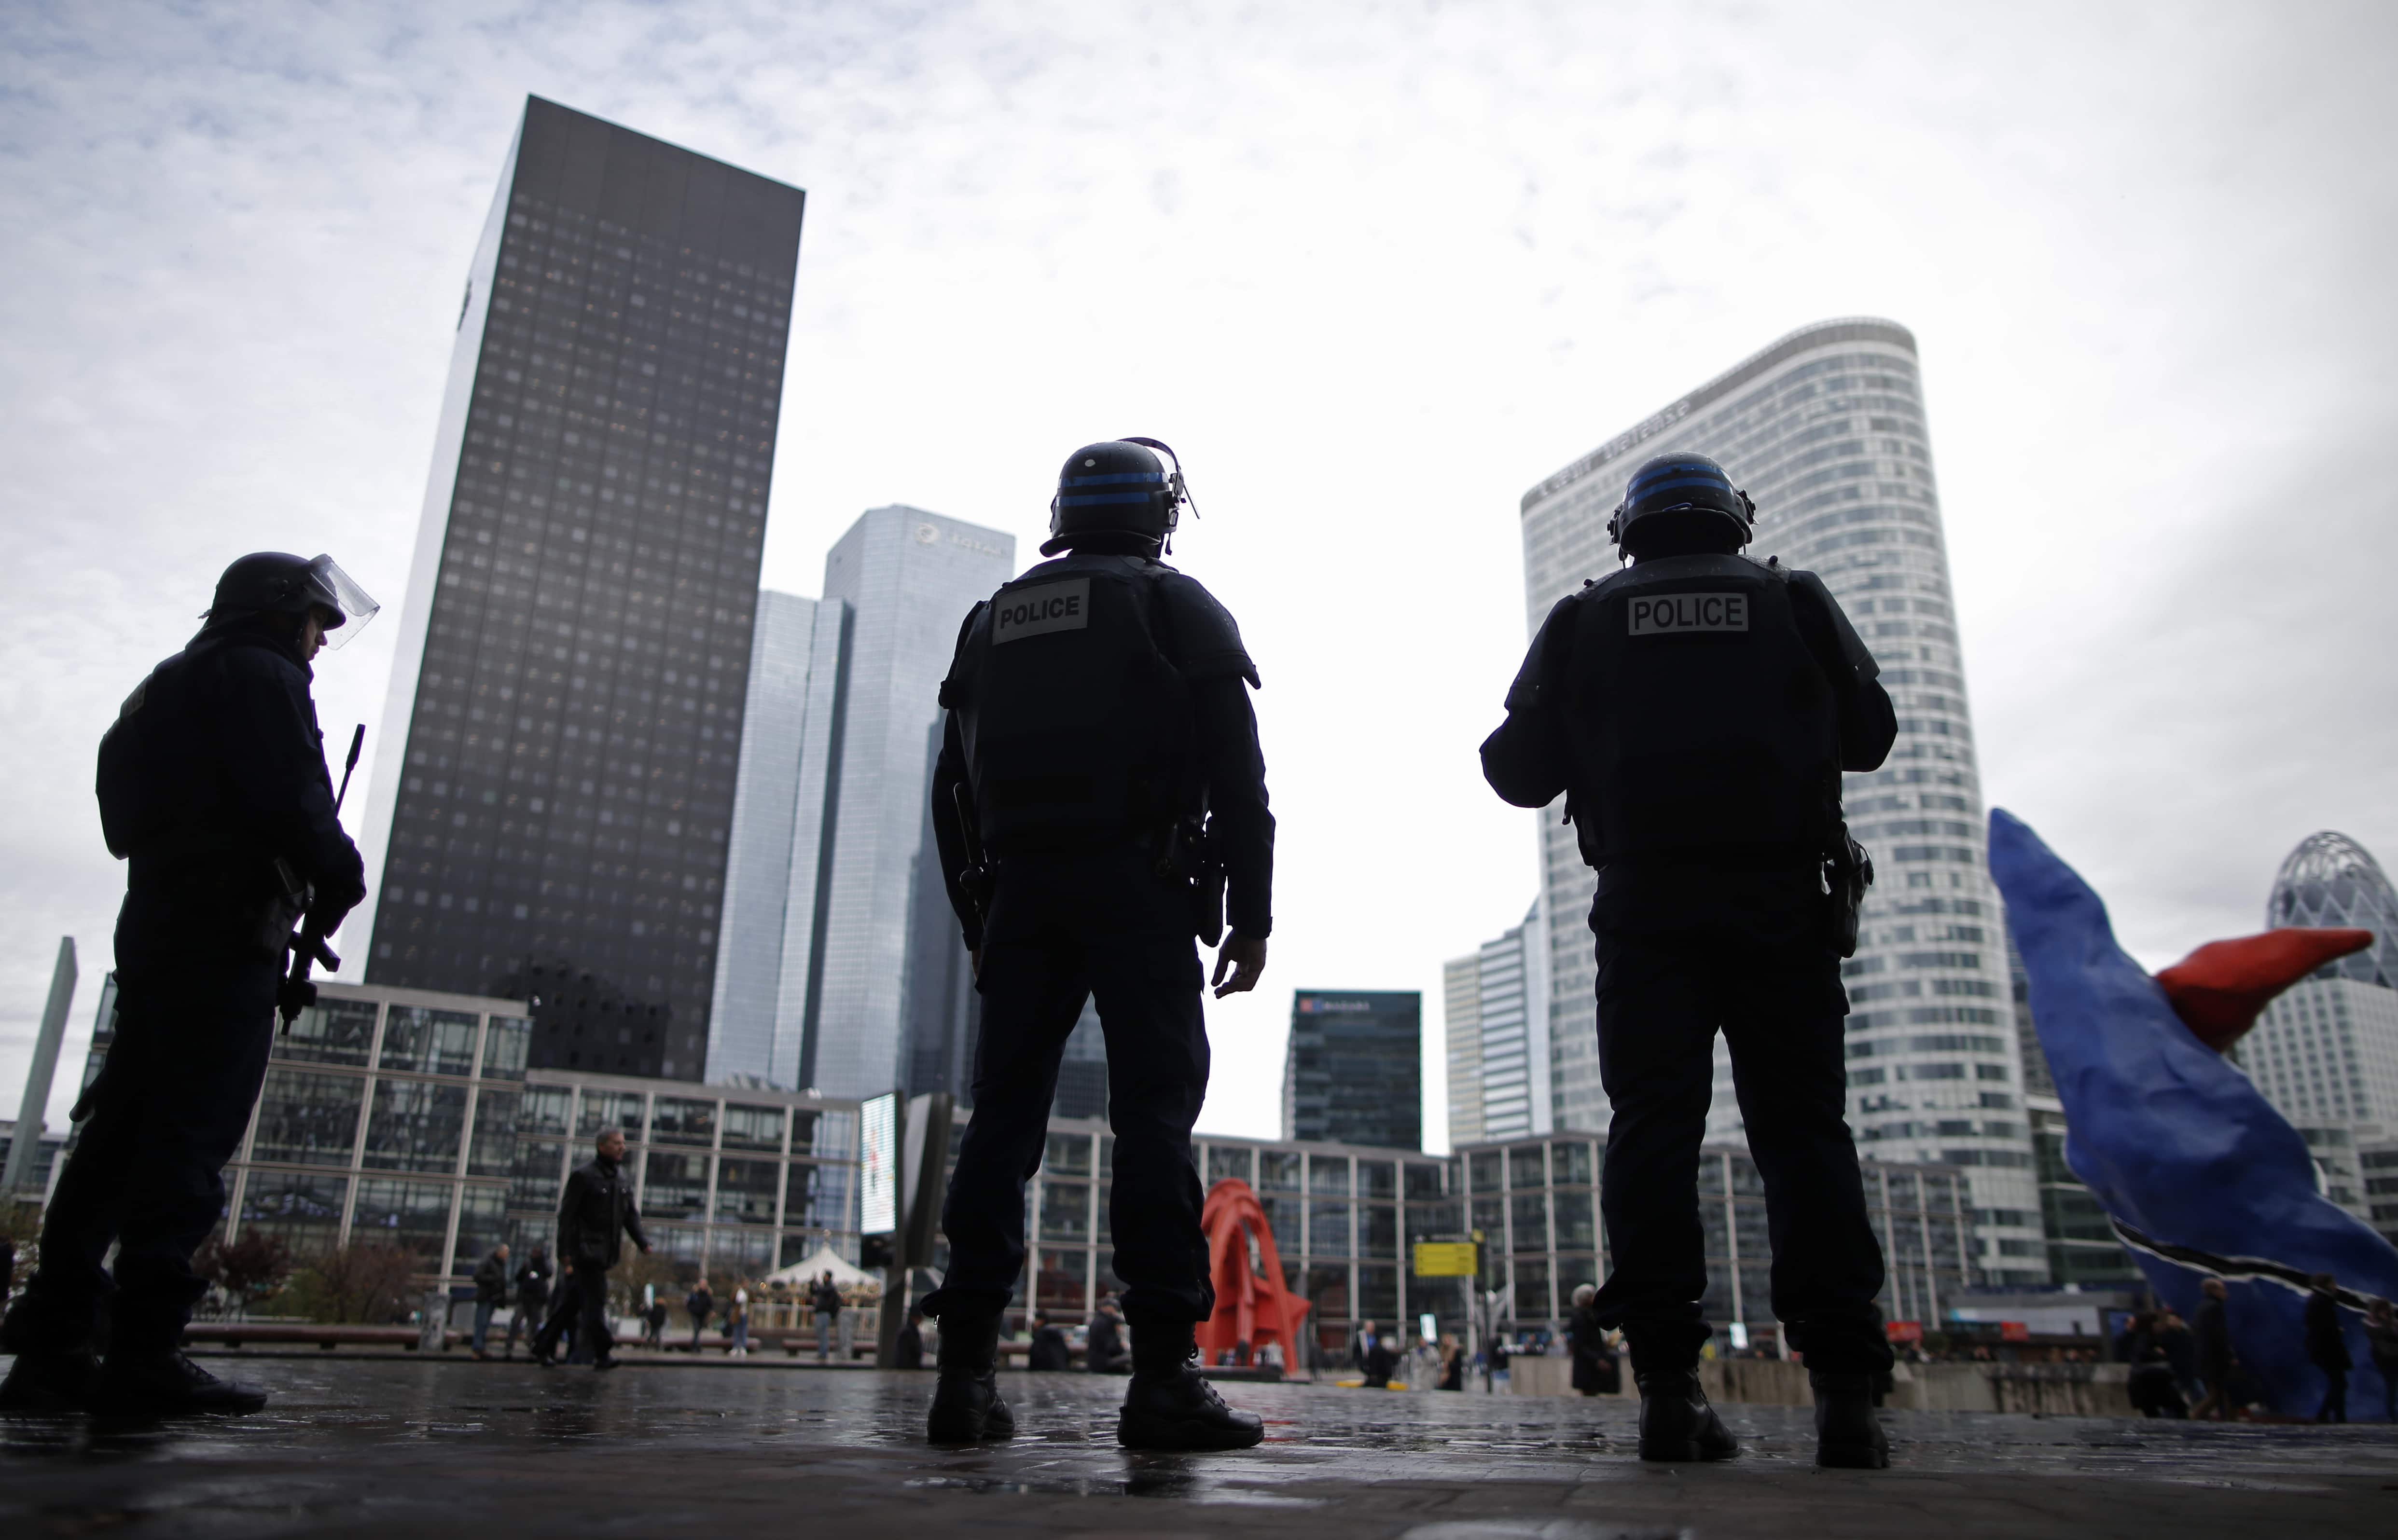 French police officers patrol at La Defense business district near Paris, 25 November 2015, REUTERS/Christian Hartmann